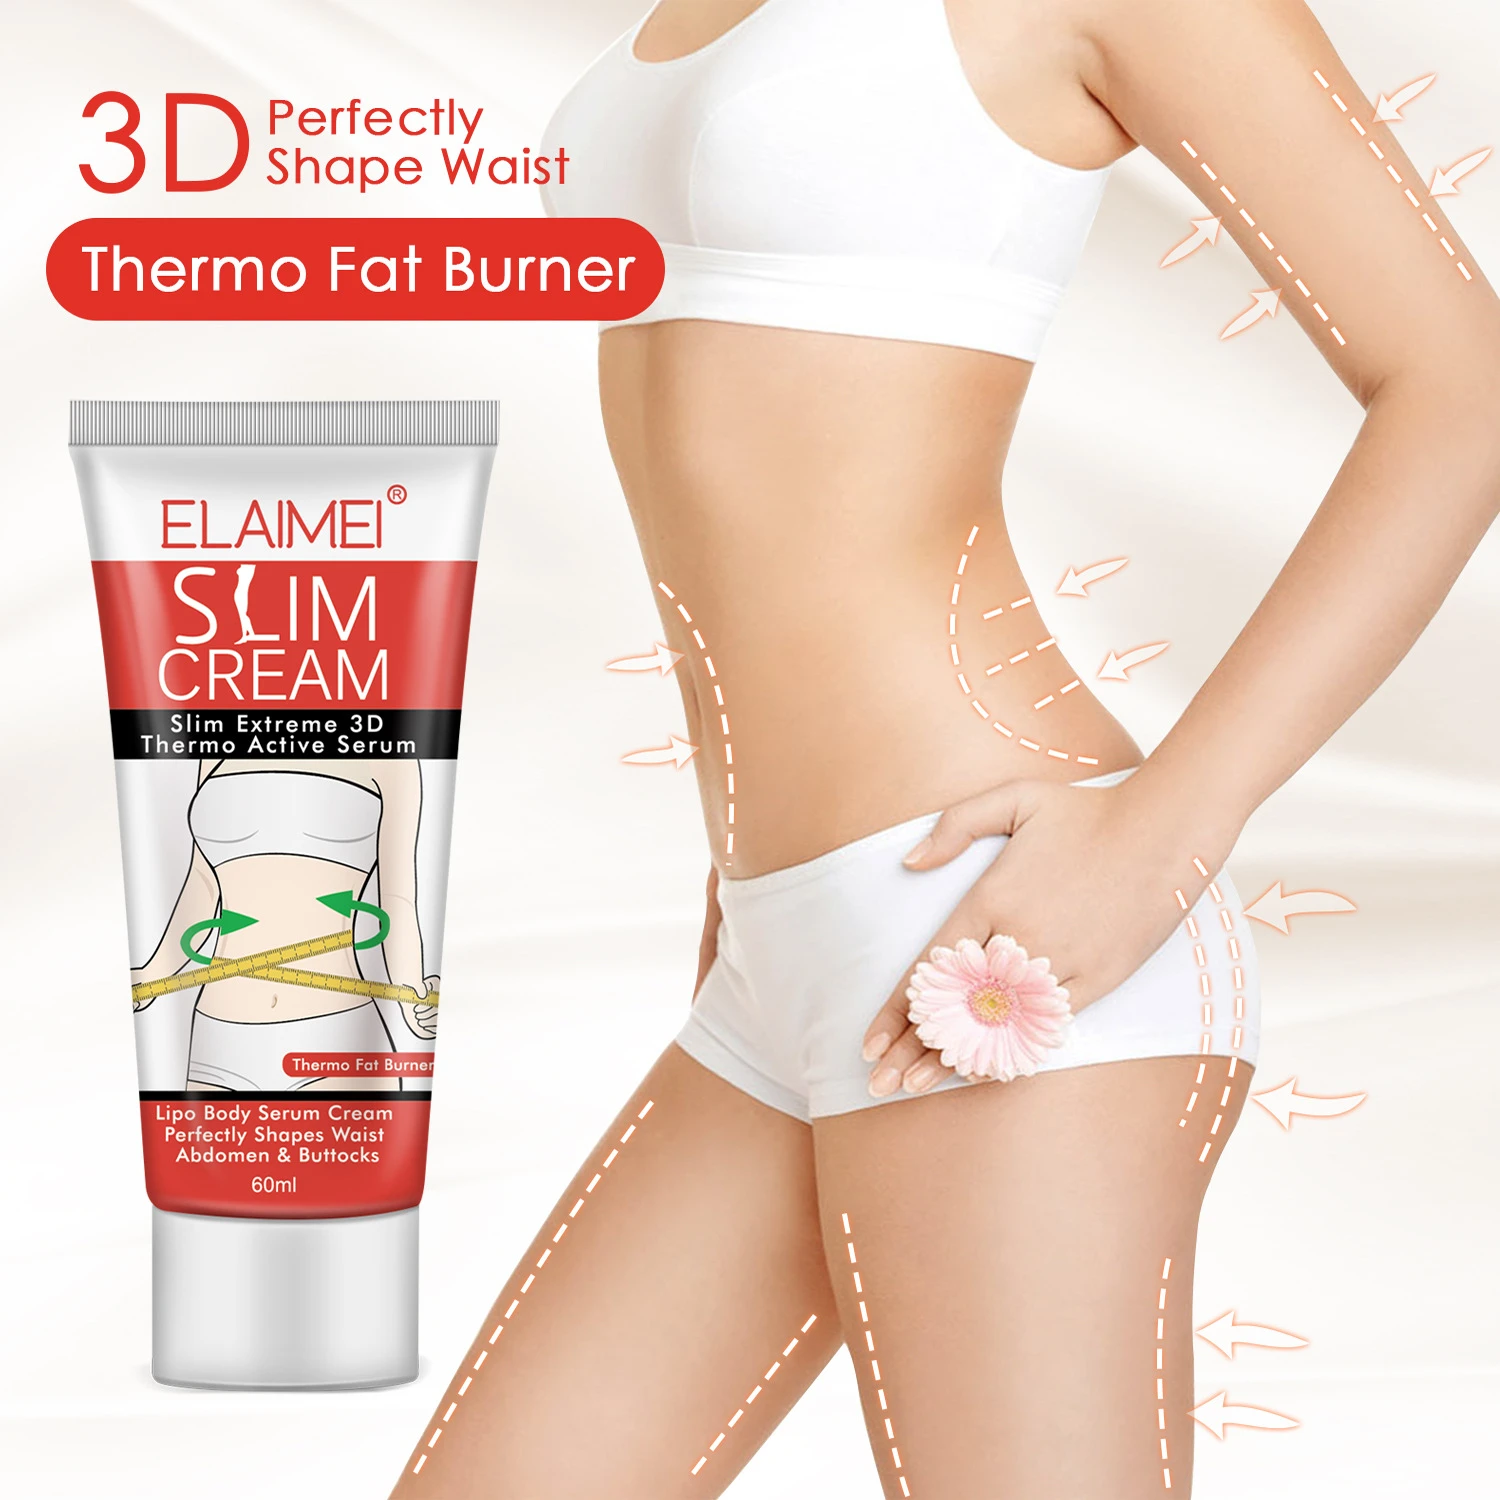 Buy Shaping Waist Abdomen And Buttocks Professional Cellulite Firming